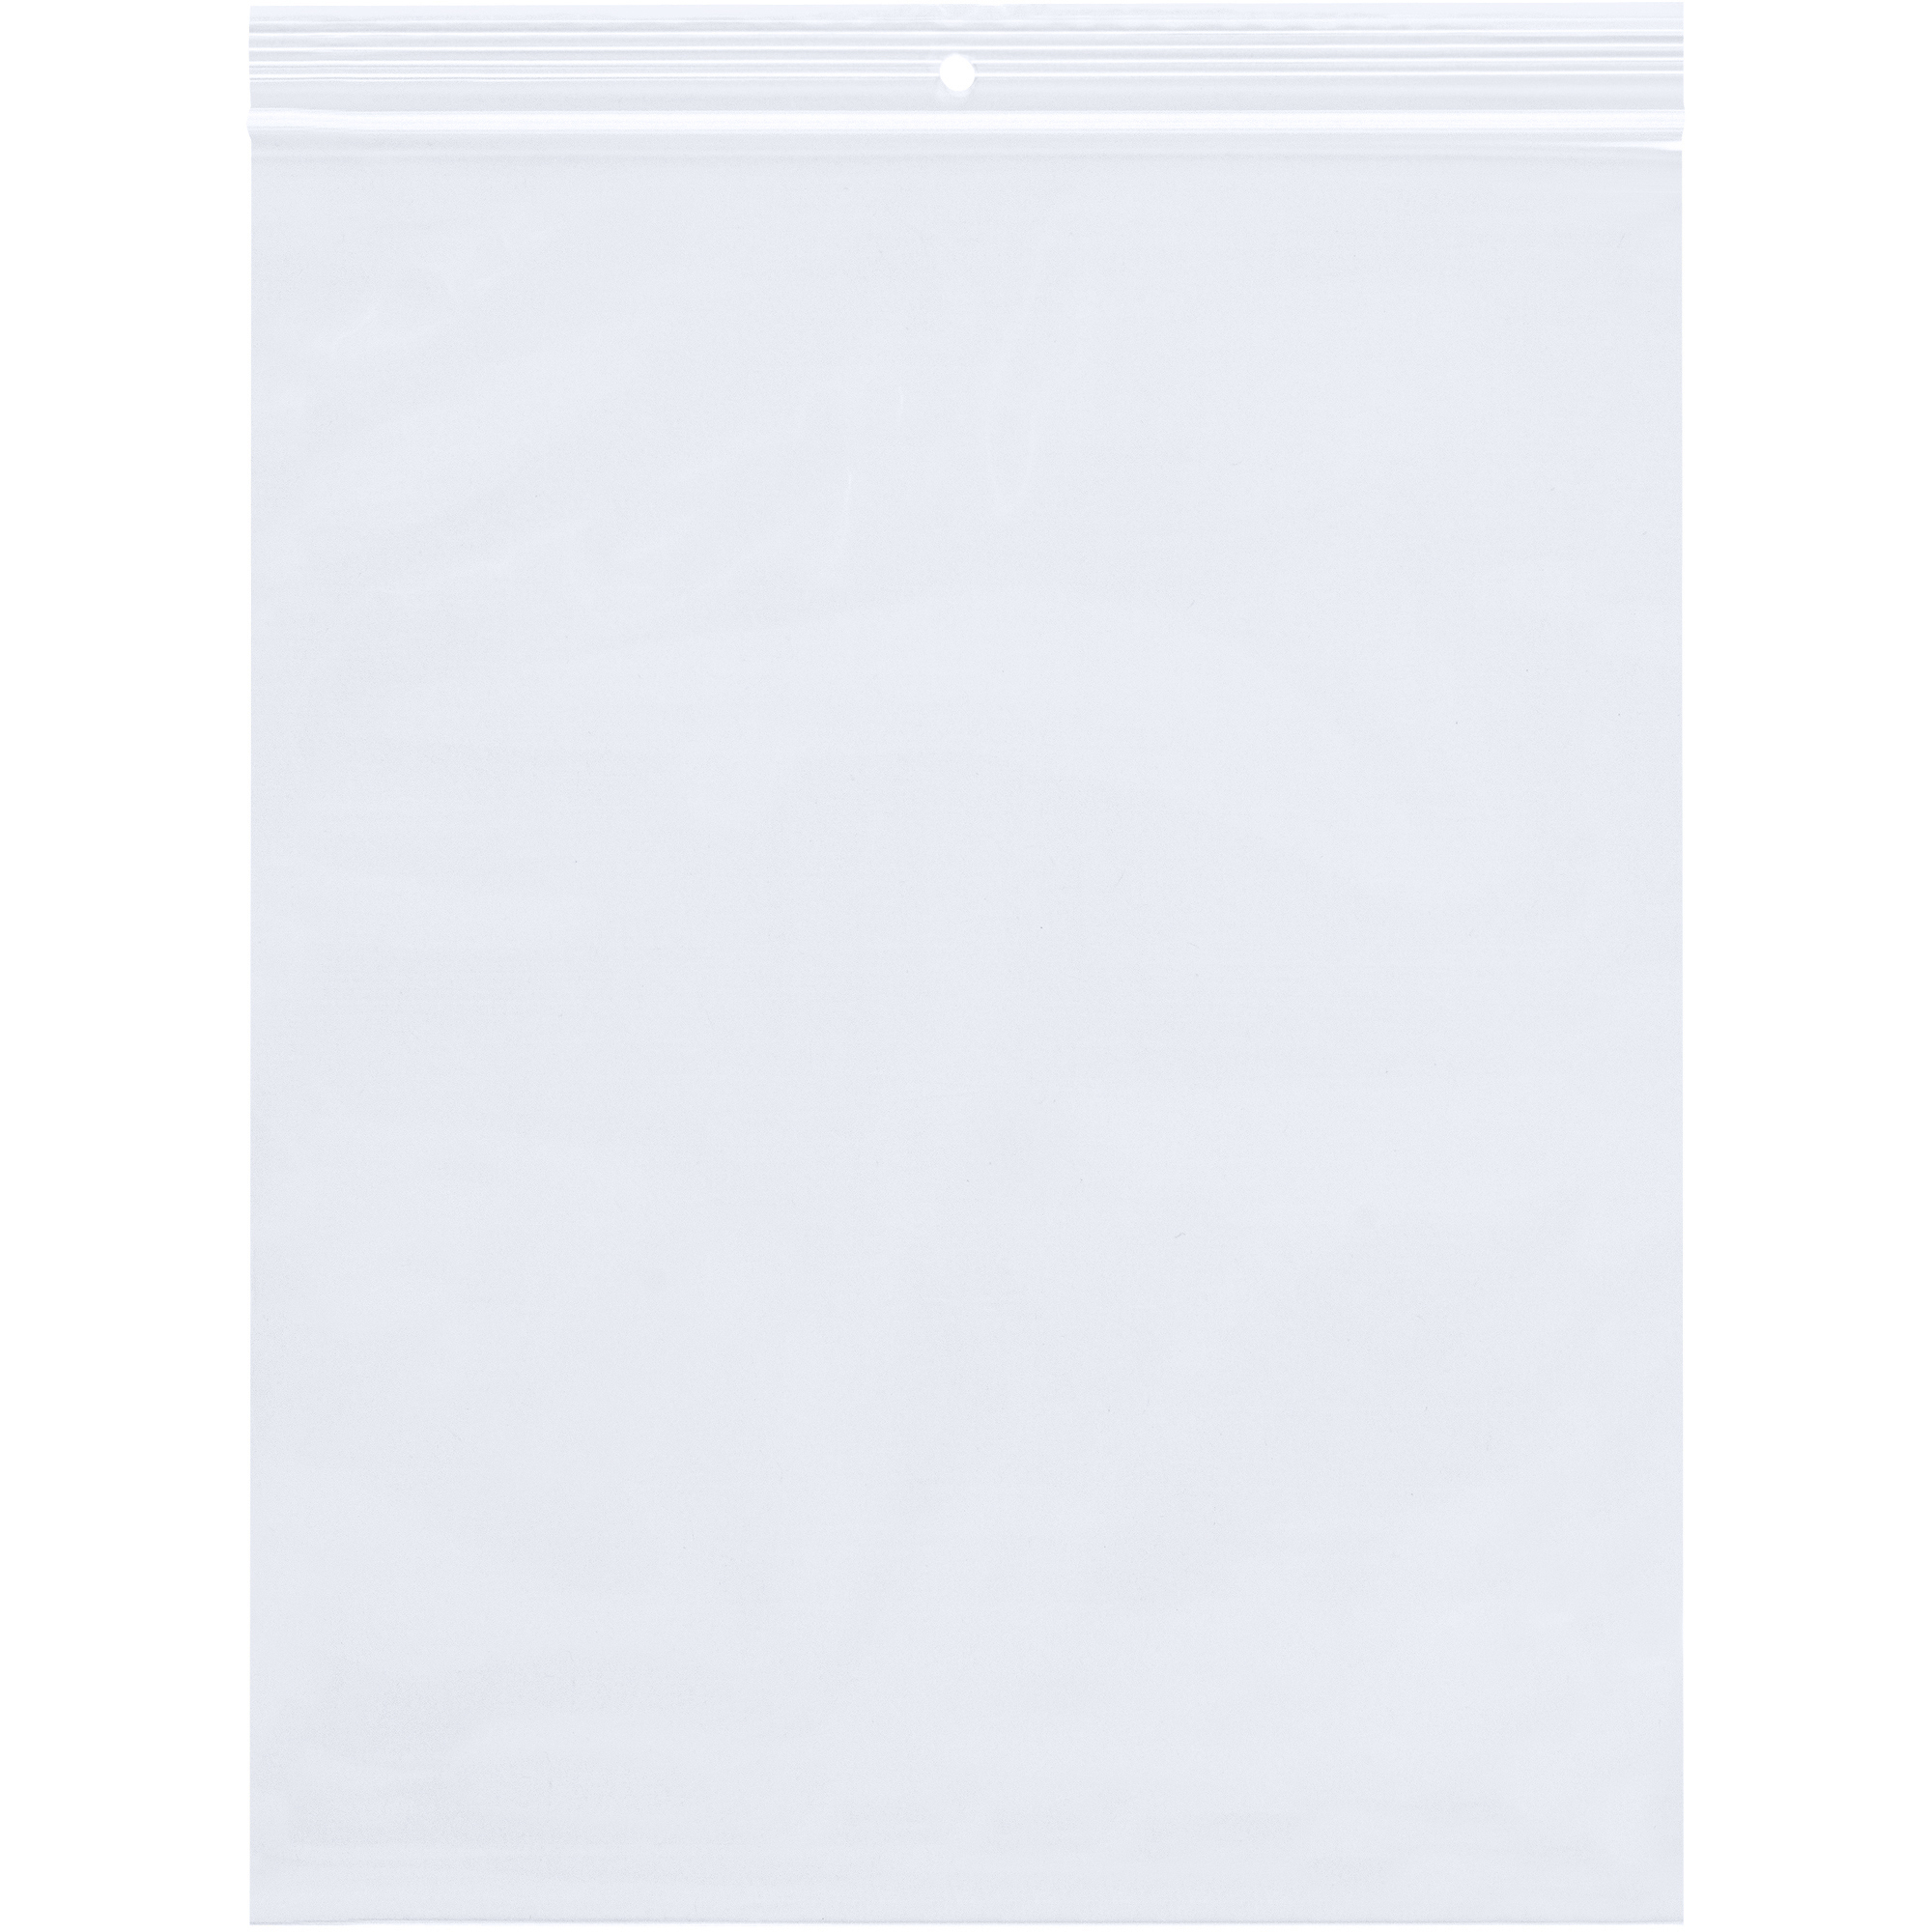 2 x 3" 2 Mil Hang Hole Reclosable Poly Bag (1000/Case) image